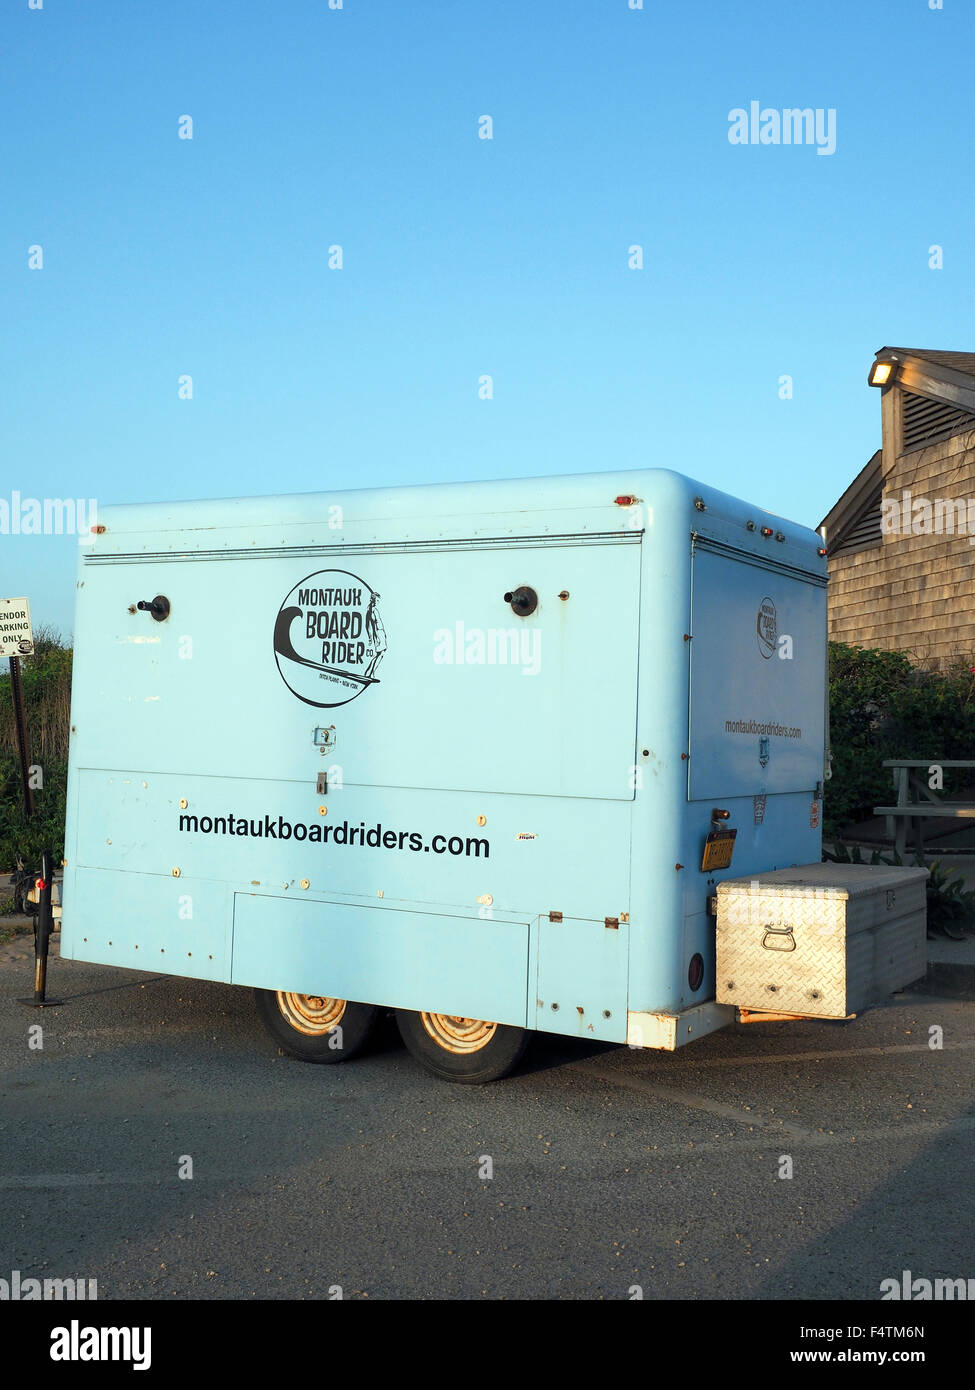 MONTAUK, NEW YORK-JUNE 23: A trailer for Montauk Board Riders surfing school is seen parked in lot by Ditch Plains beach, suppos Stock Photo